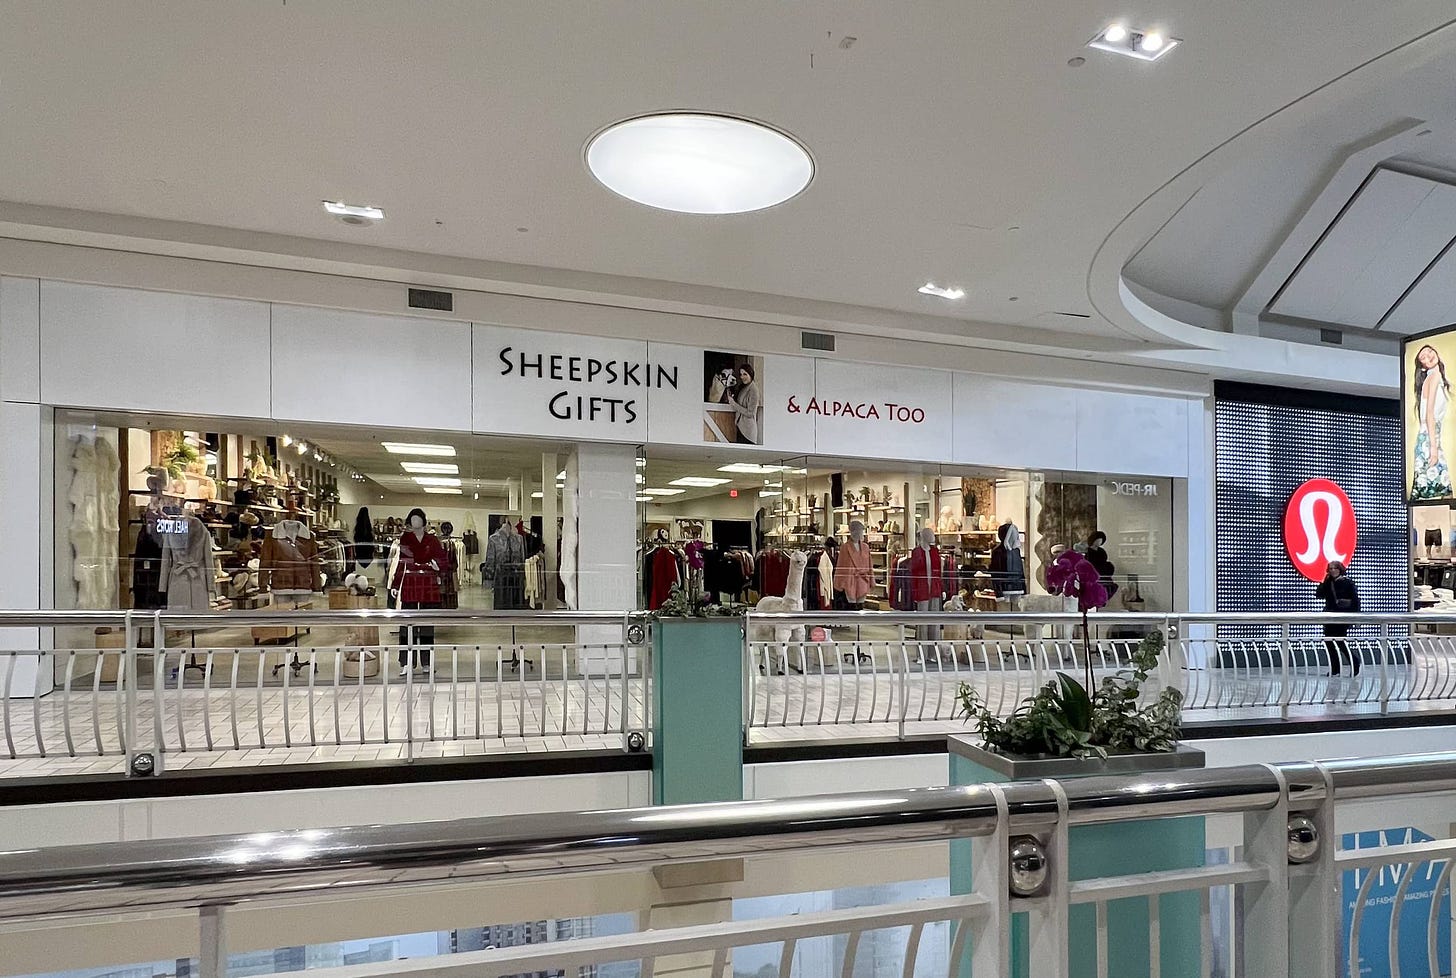 Sheepskin Gifts And Alpaca Too at Tysons Corner Center. The space was previously occupied by Apple Tysons Corner.